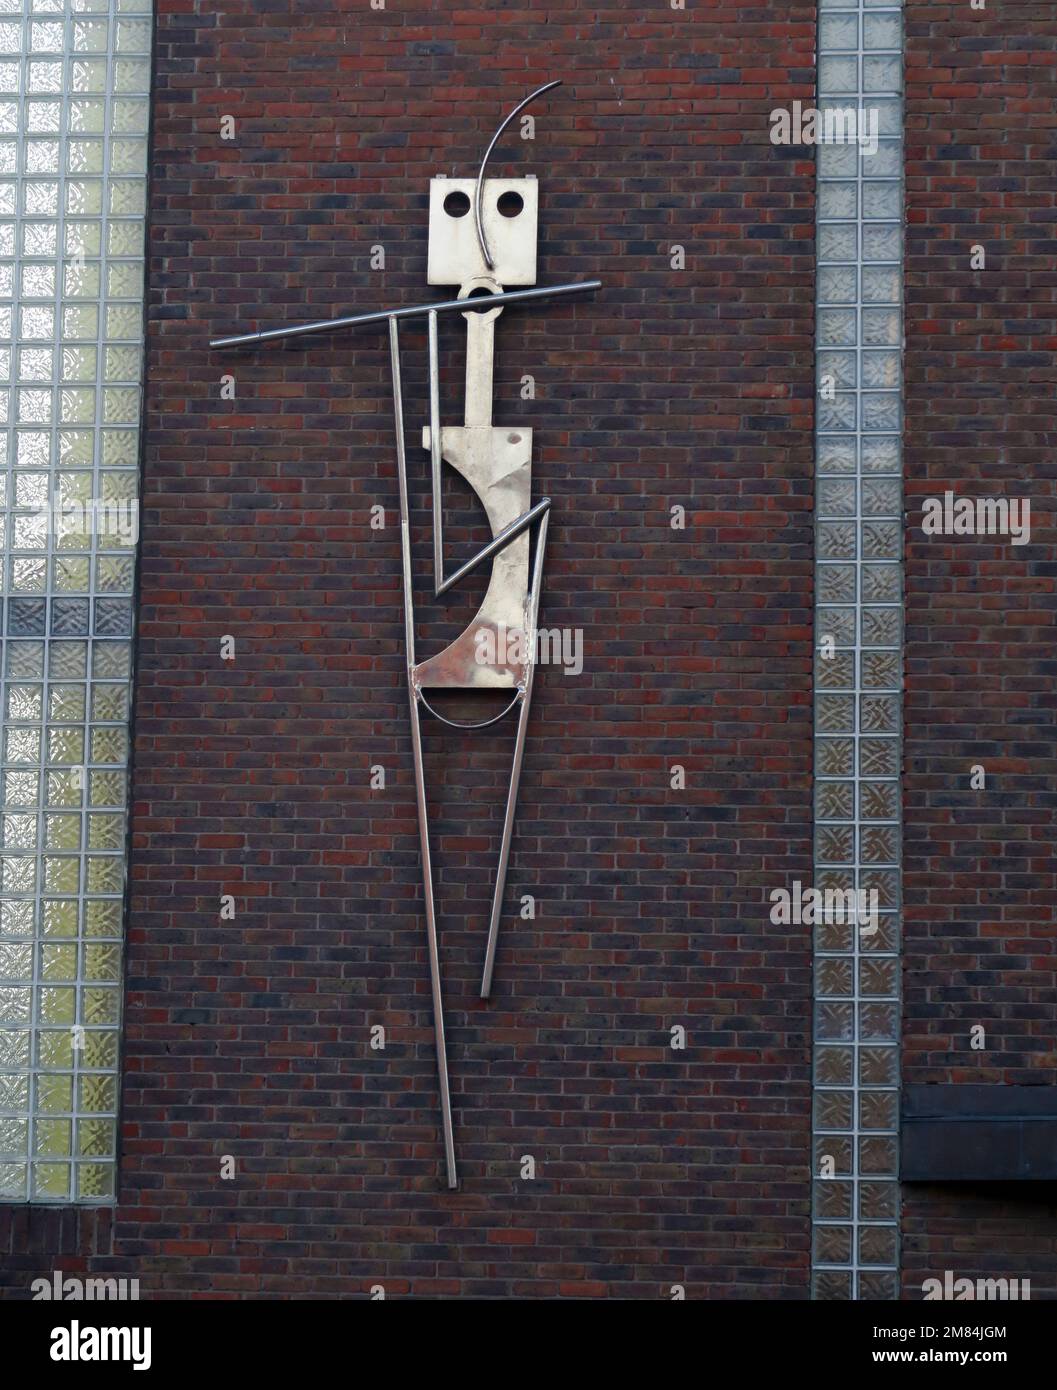 Metal art, figure playing a flute, attached to a brick wall, 8 King St N, Dublin, D07 X704, Eire, Ireland Stock Photo